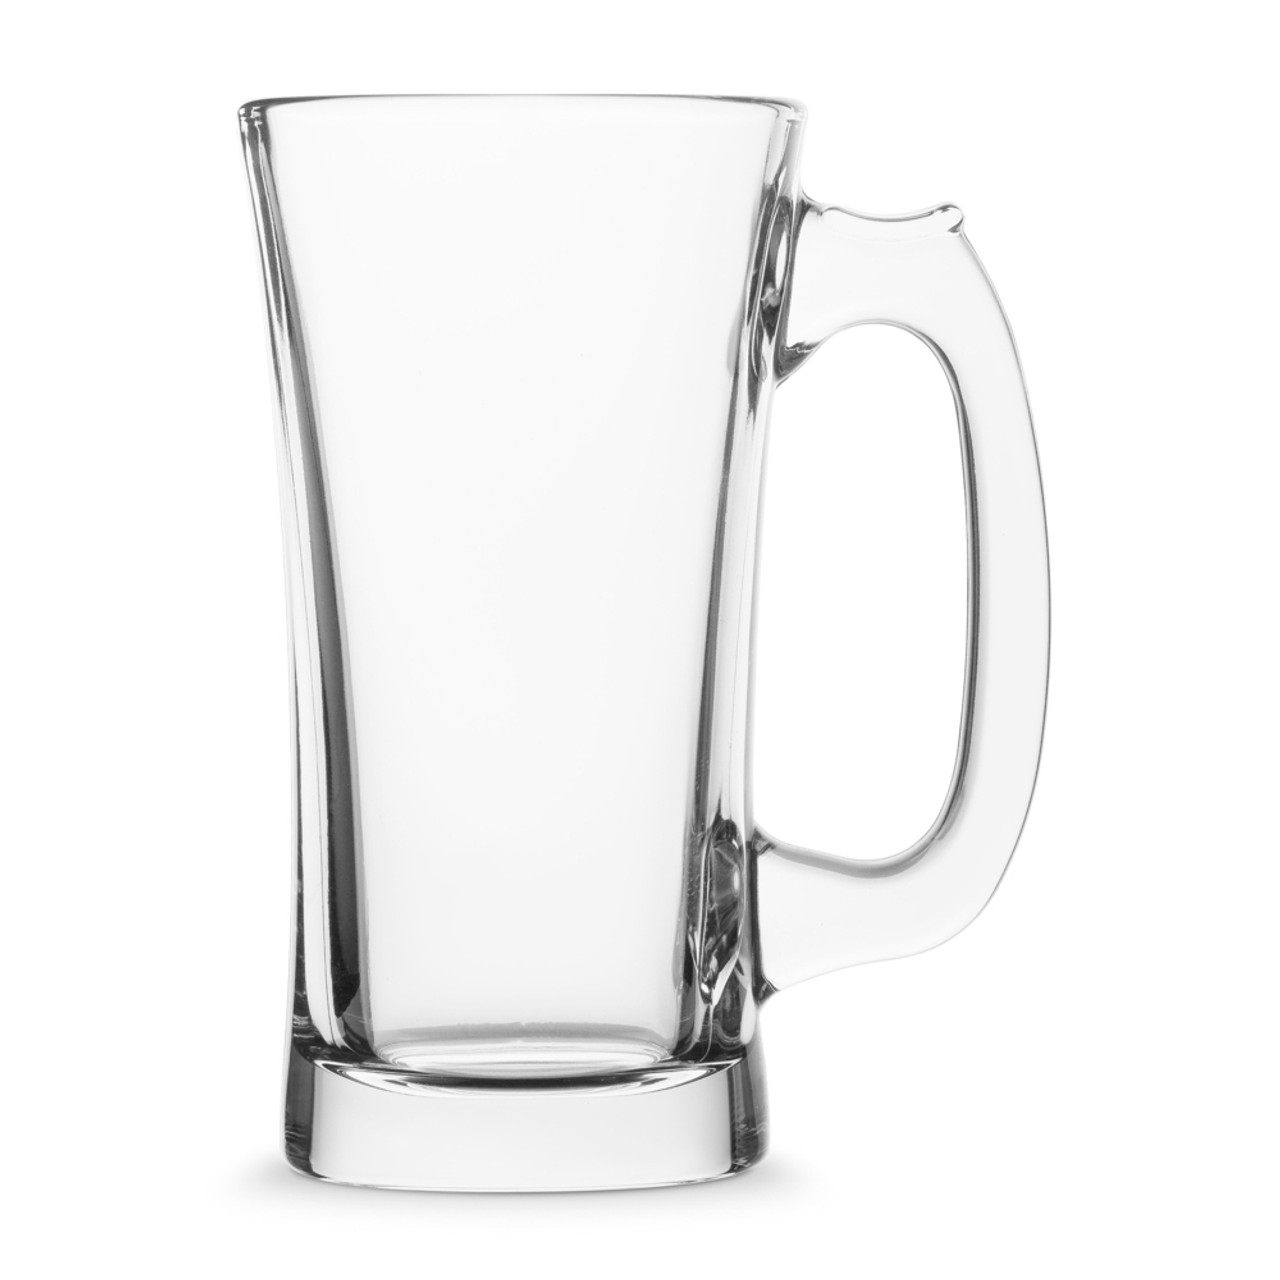 14oz guinness beer glass cup/glass beer